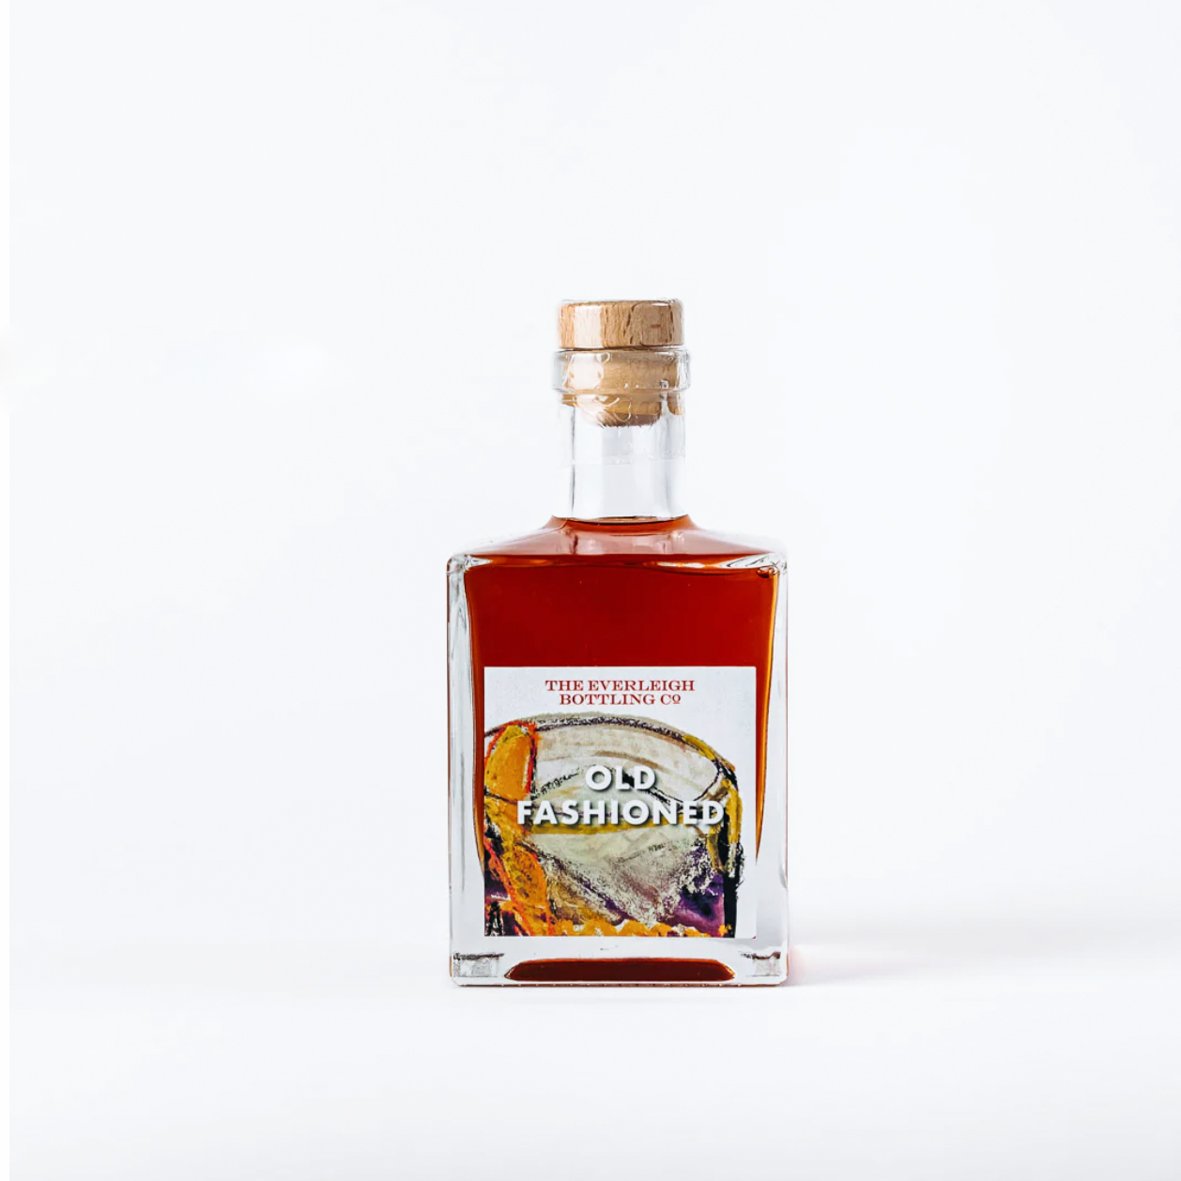 EVELEIGH OLD FASHIONED BOTTLING CO-8.jpg